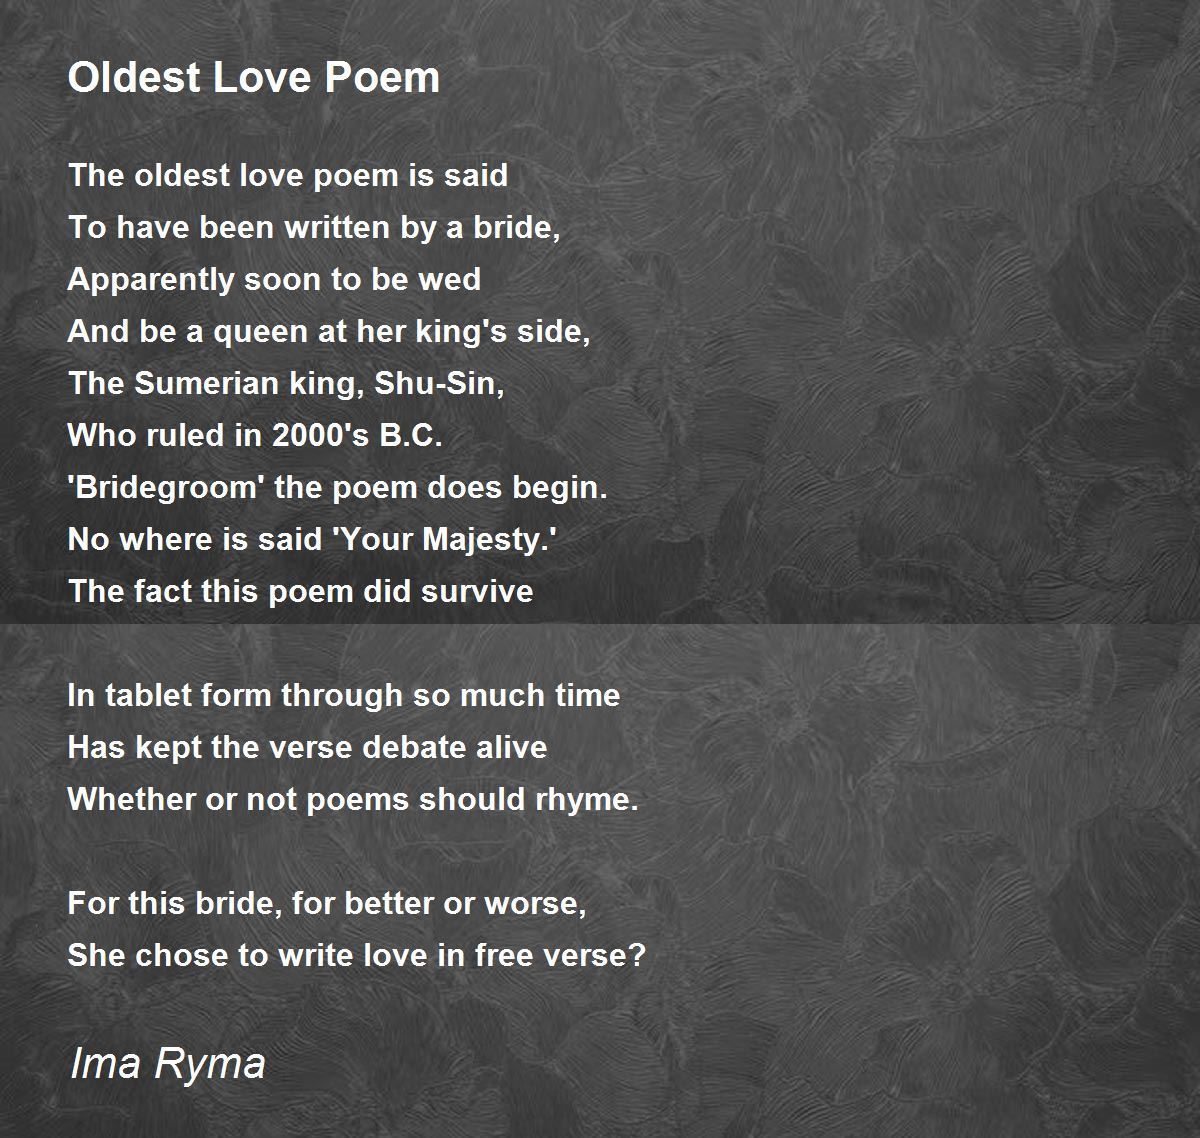 love poems for her that rhyme